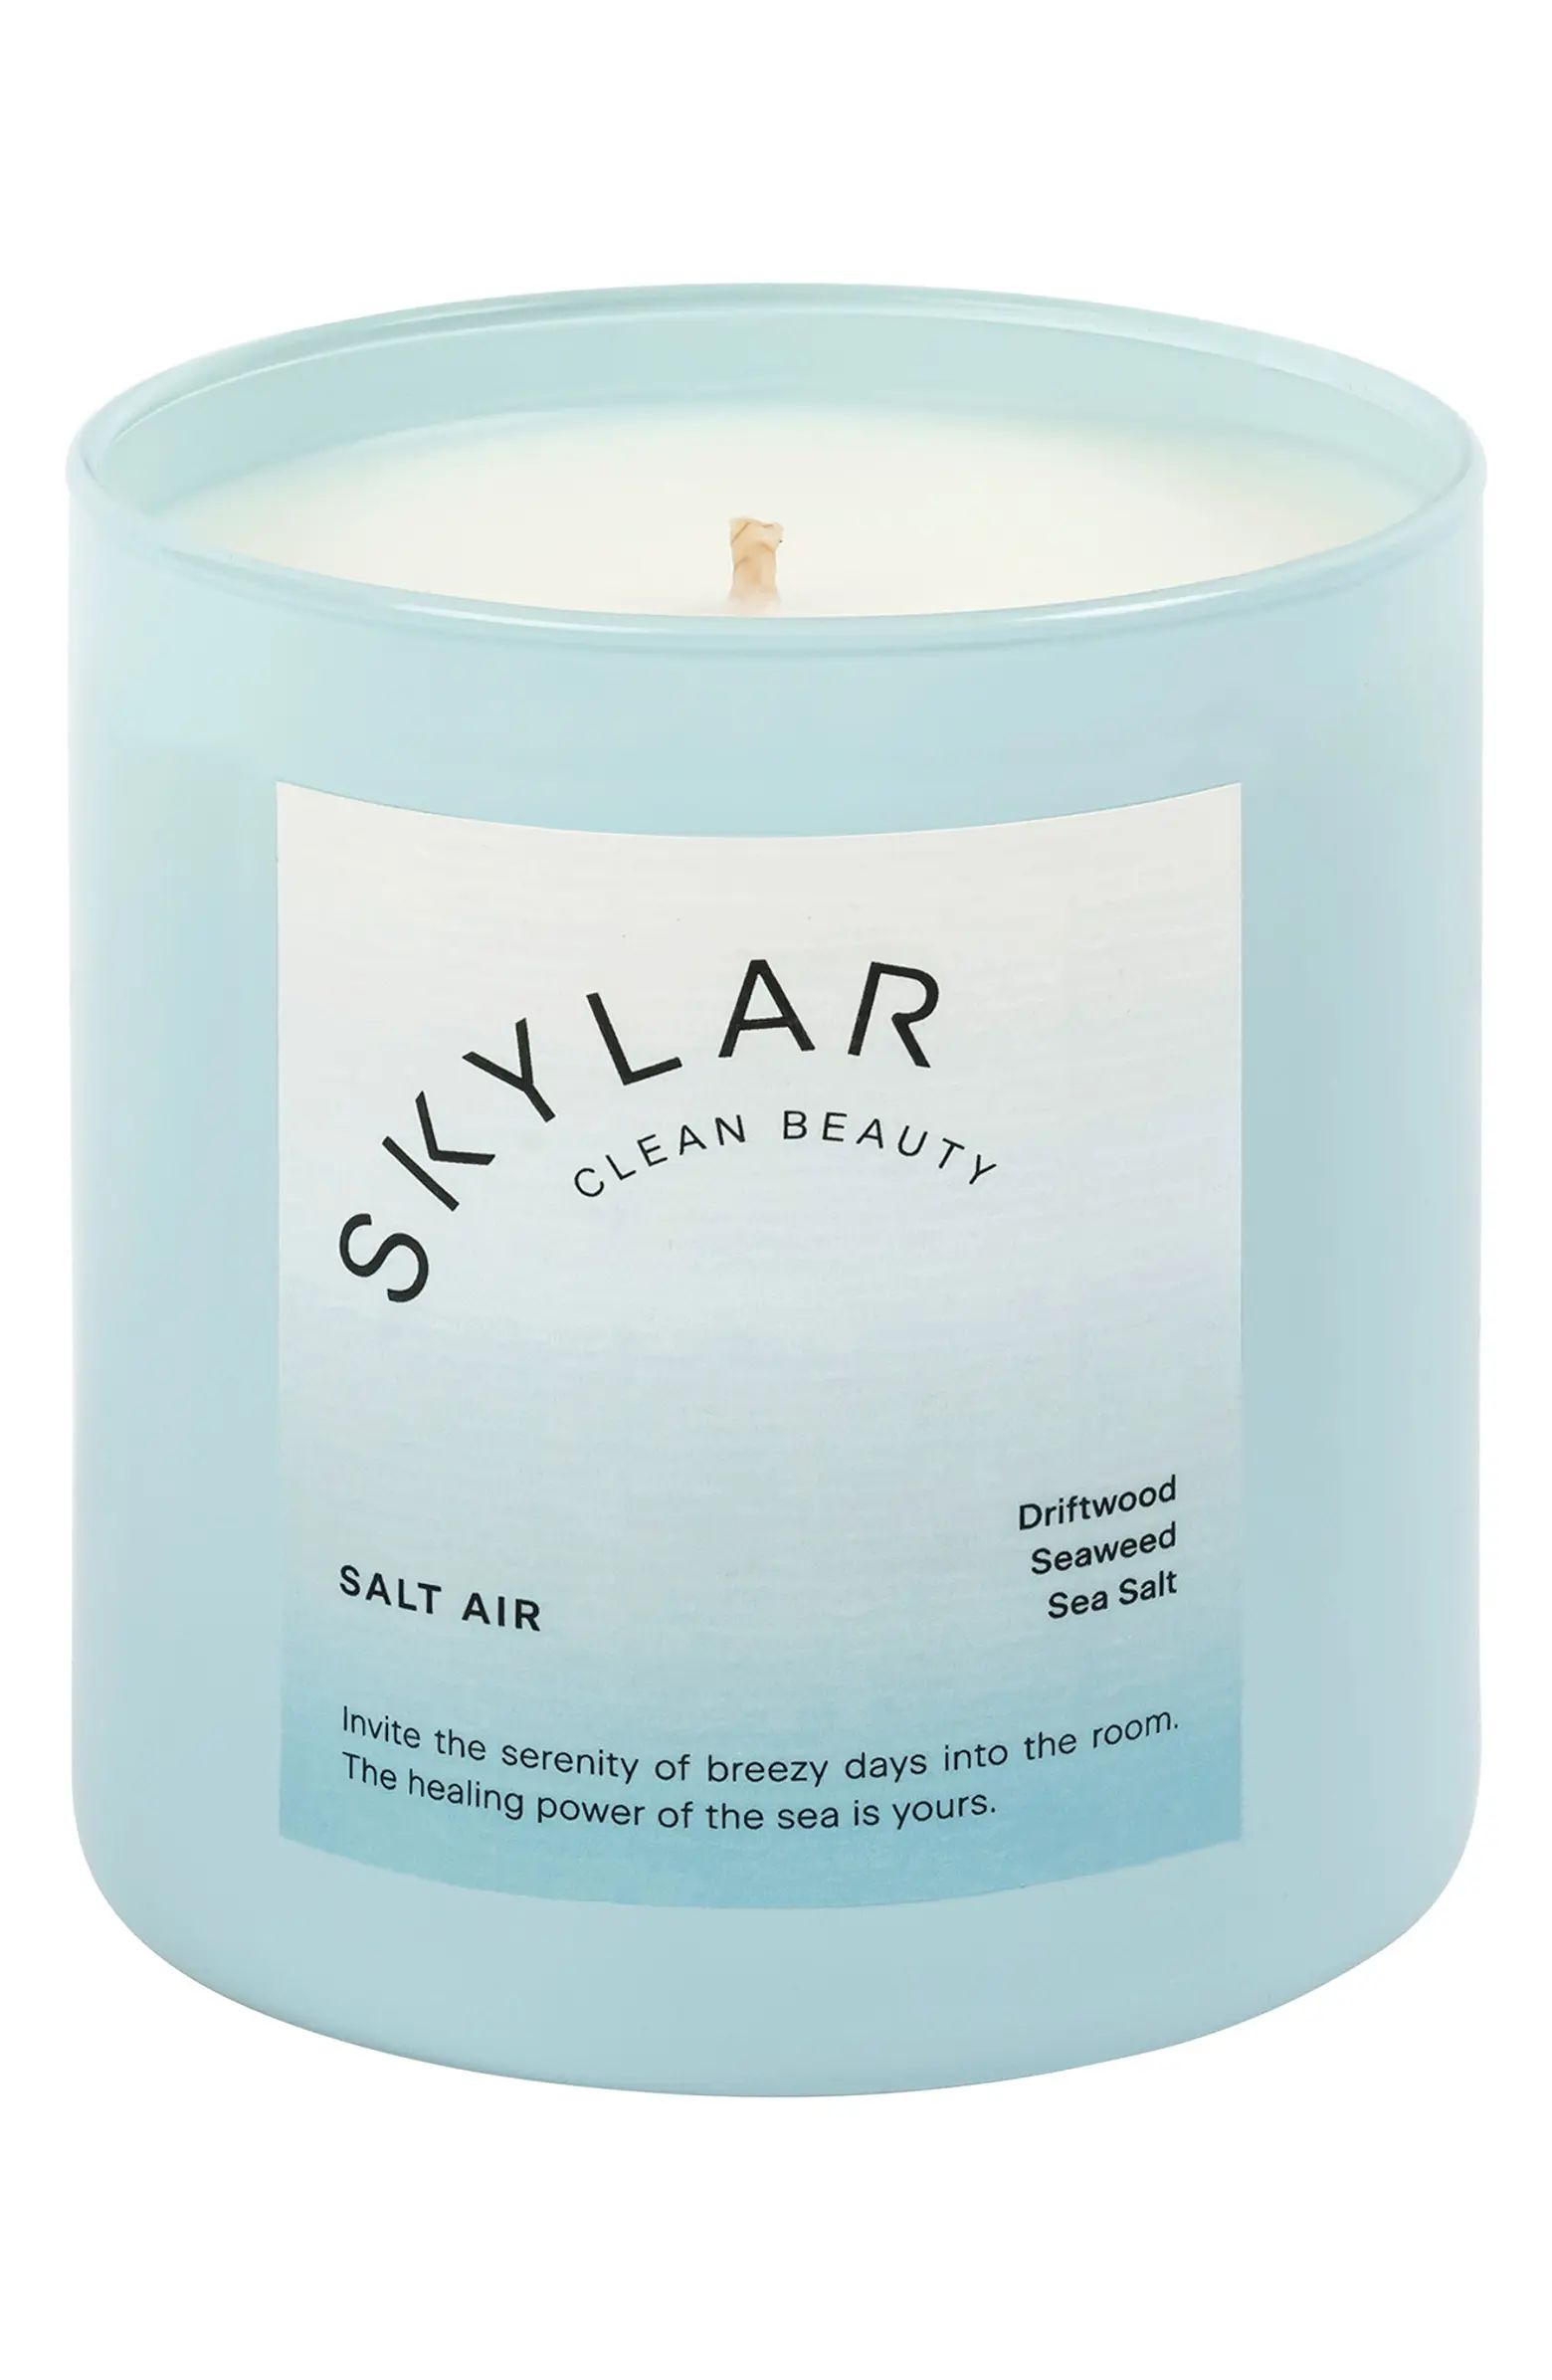 Salt Air Scented Candle | Nordstrom